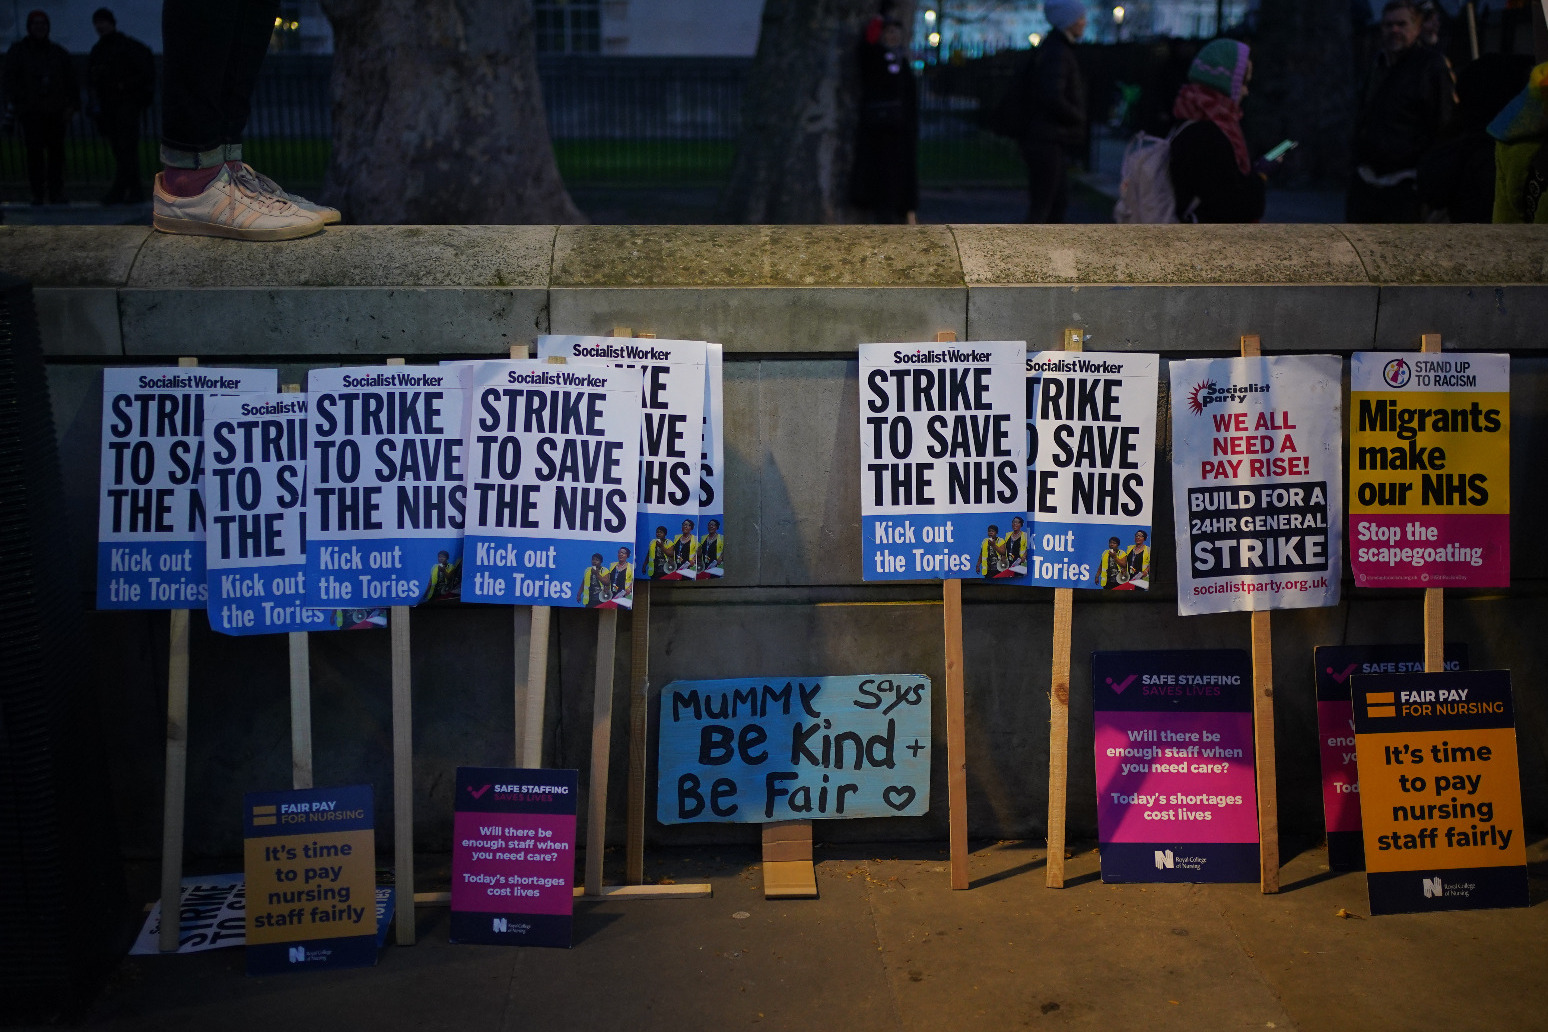 ‘Large-scale support’ among patients for NHS strikes 